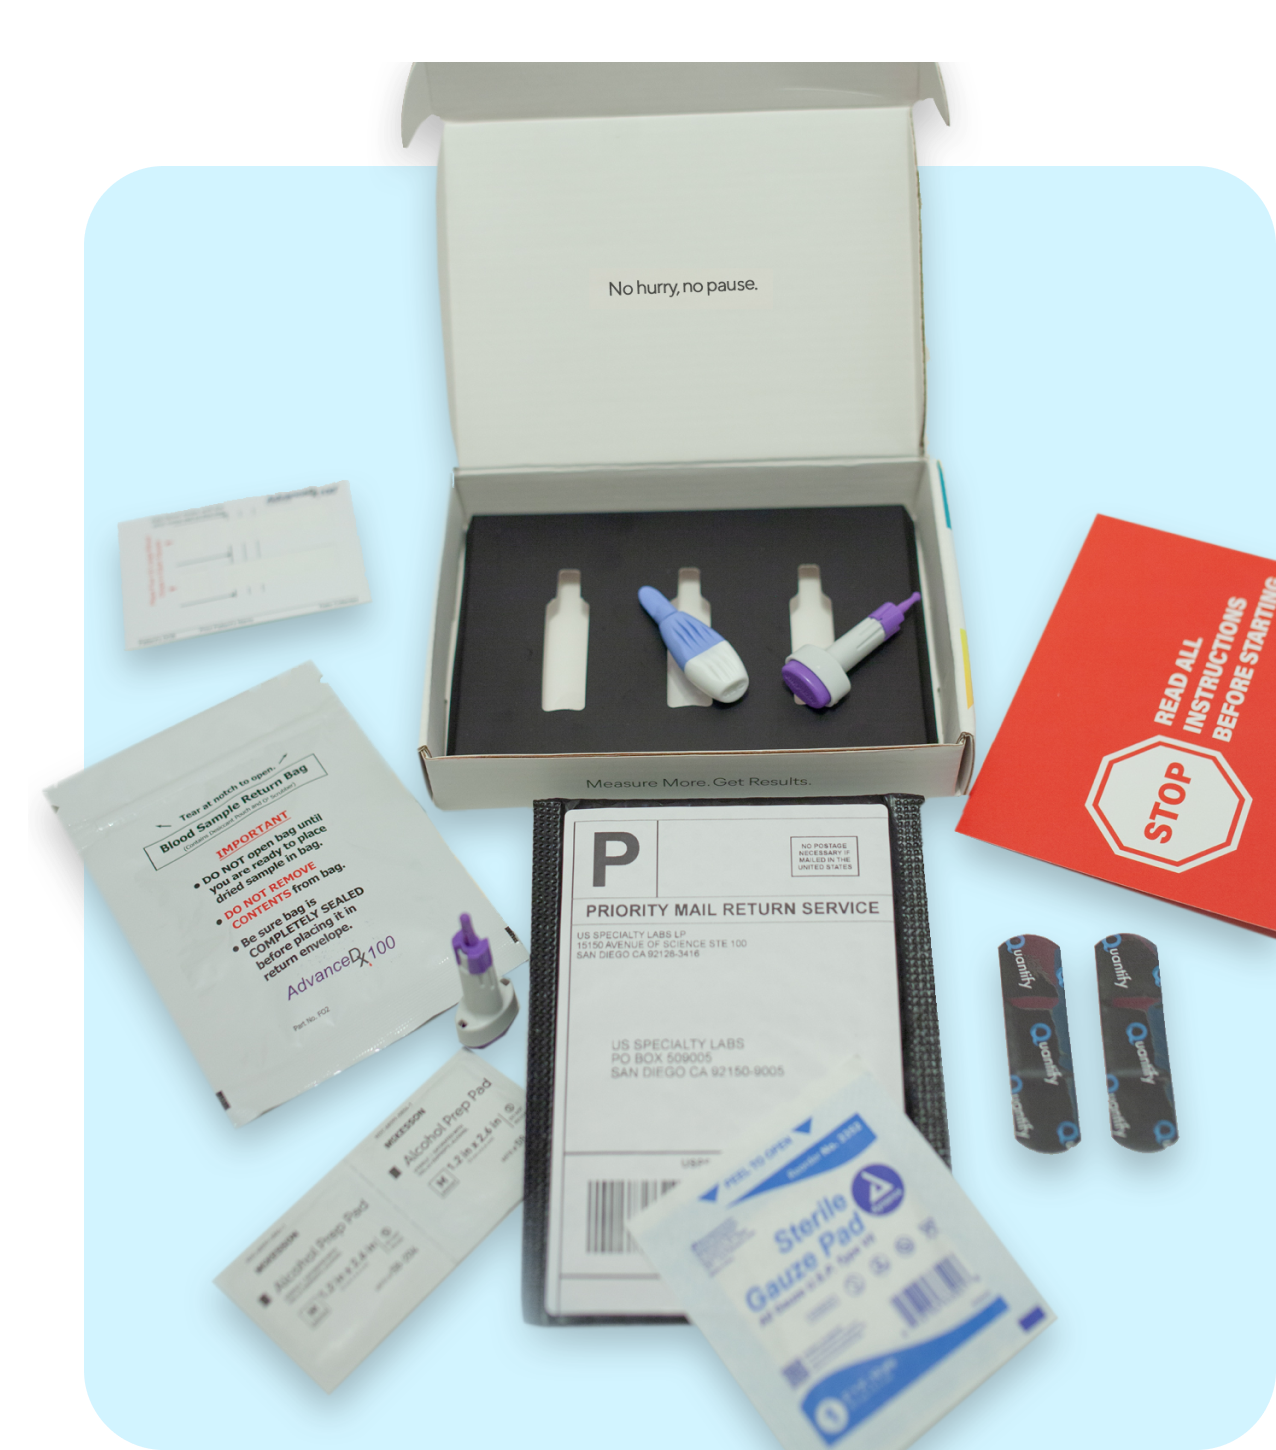 Complete Blood Test Kit You Can Do At Home